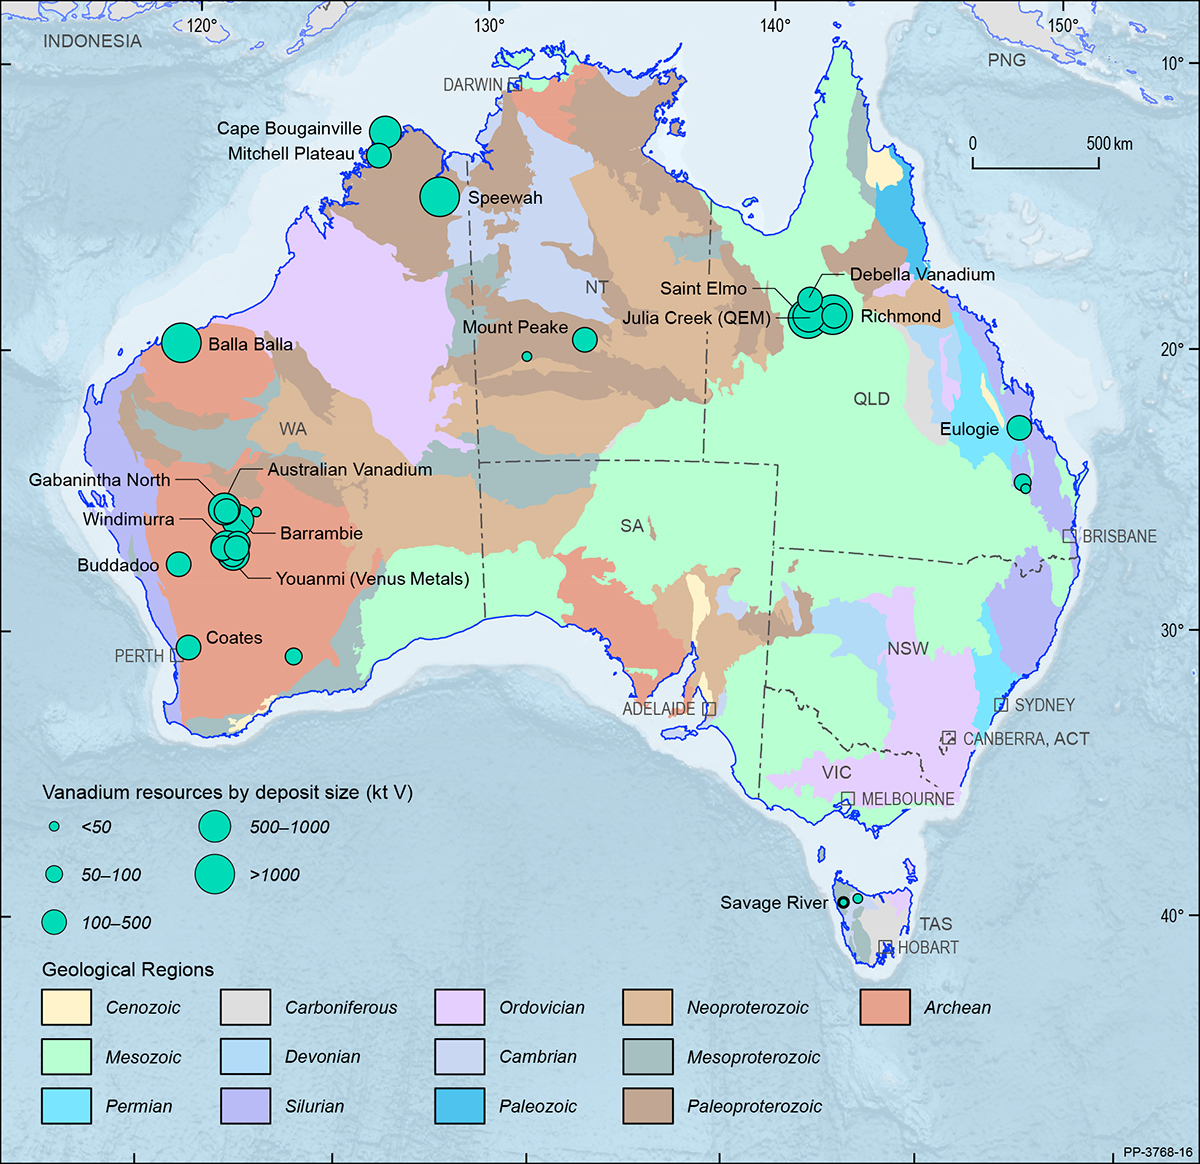 A map showing the Australian continent shaded by the ages of the main geological provinces highlighting the geographical distribution of Australian vanadium deposits in 2019.